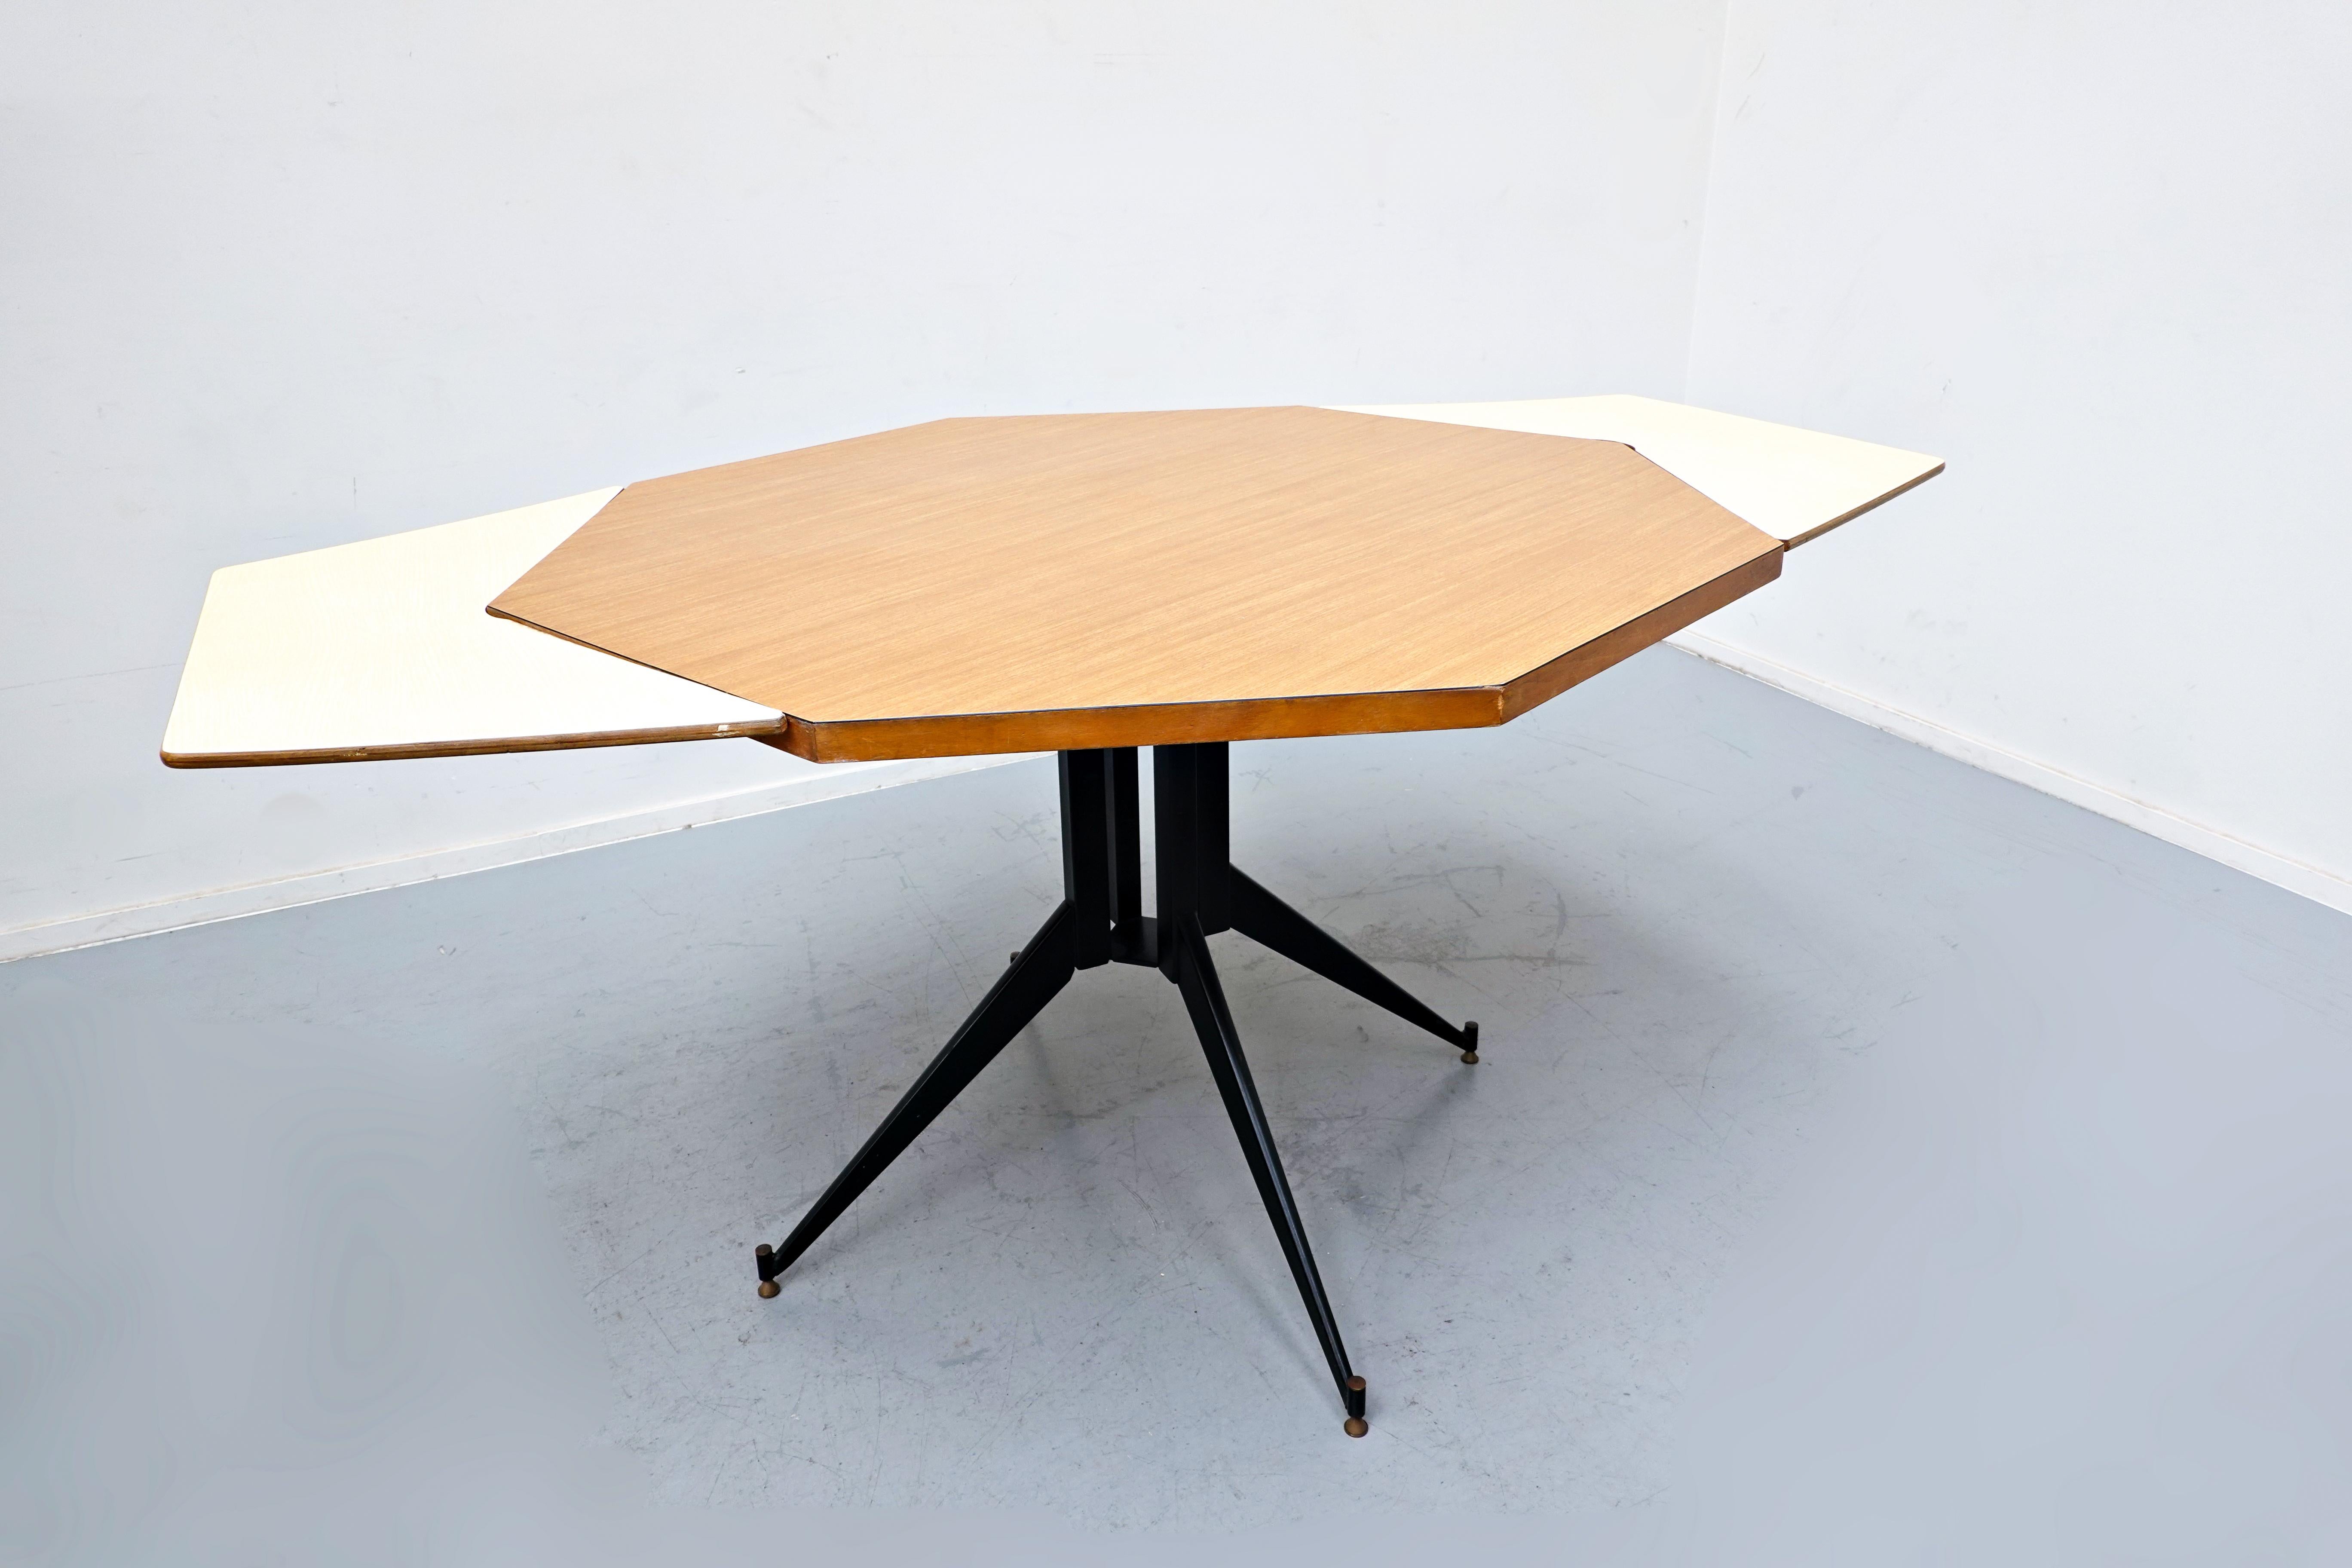 Mid-century extendable dining table by Carlo Ratti - 1960s.